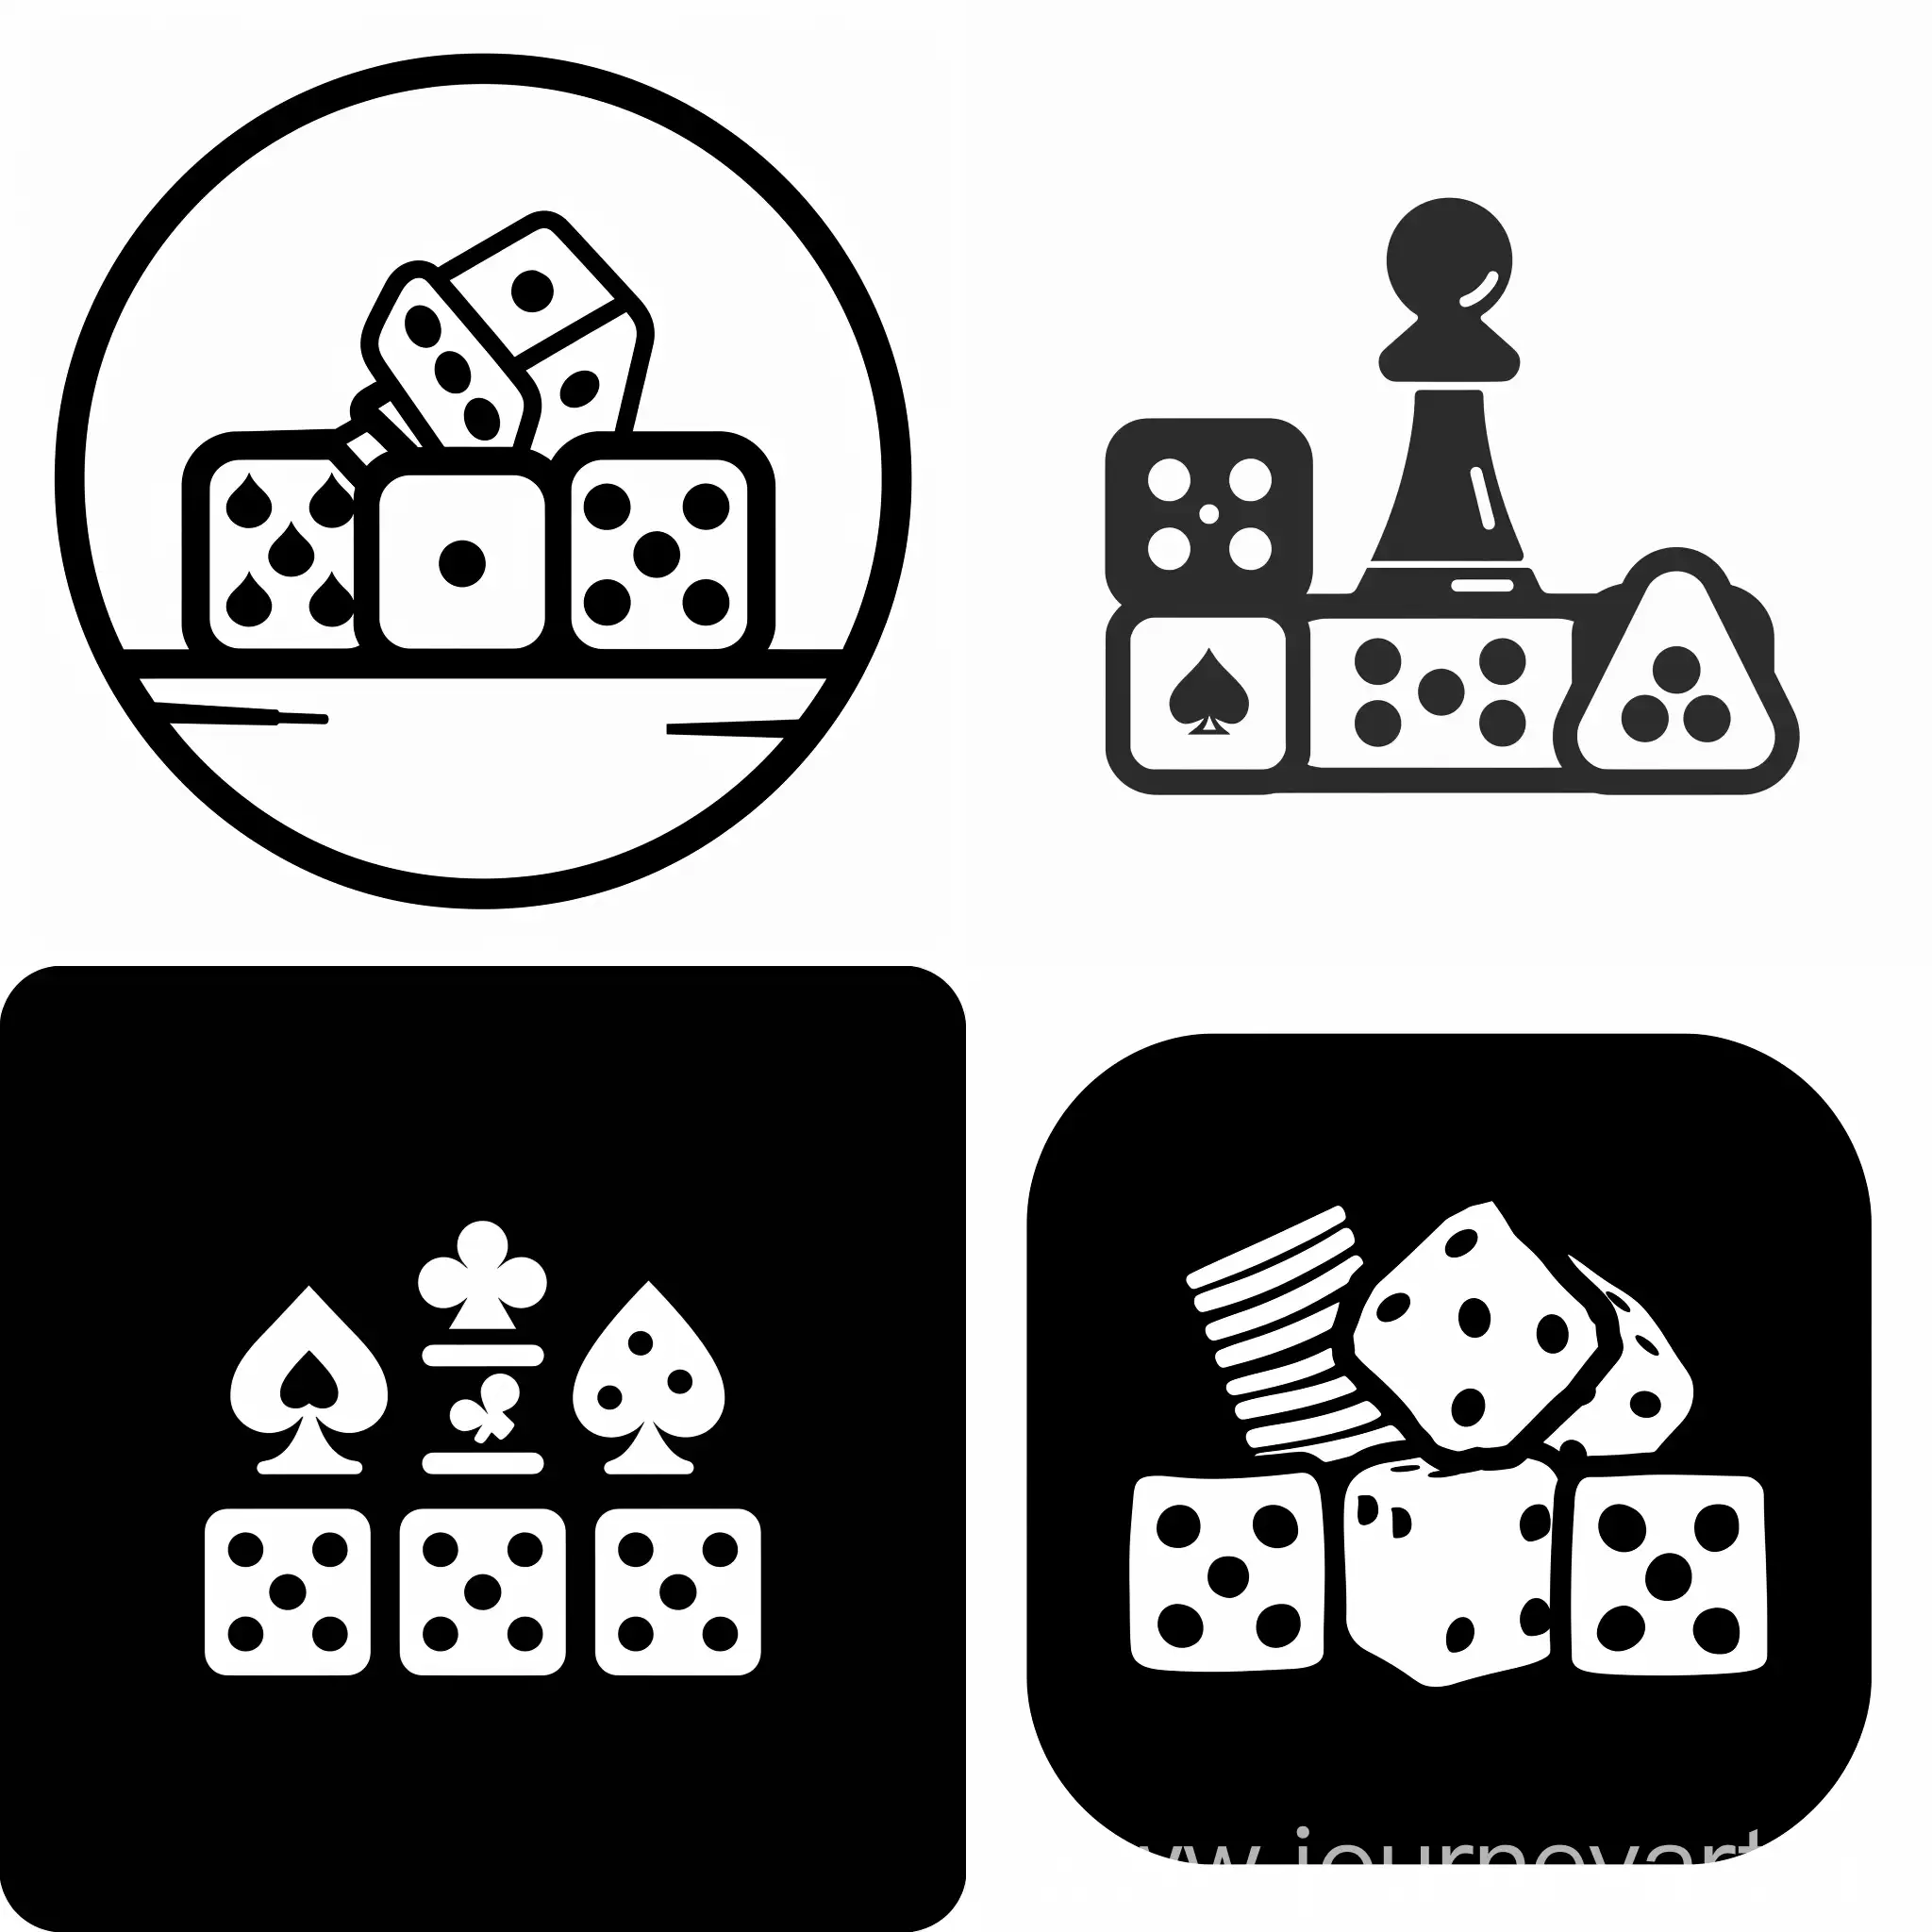 Board-Game-Icon-Minimalist-Black-and-White-Design-for-Gaming-Enthusiasts